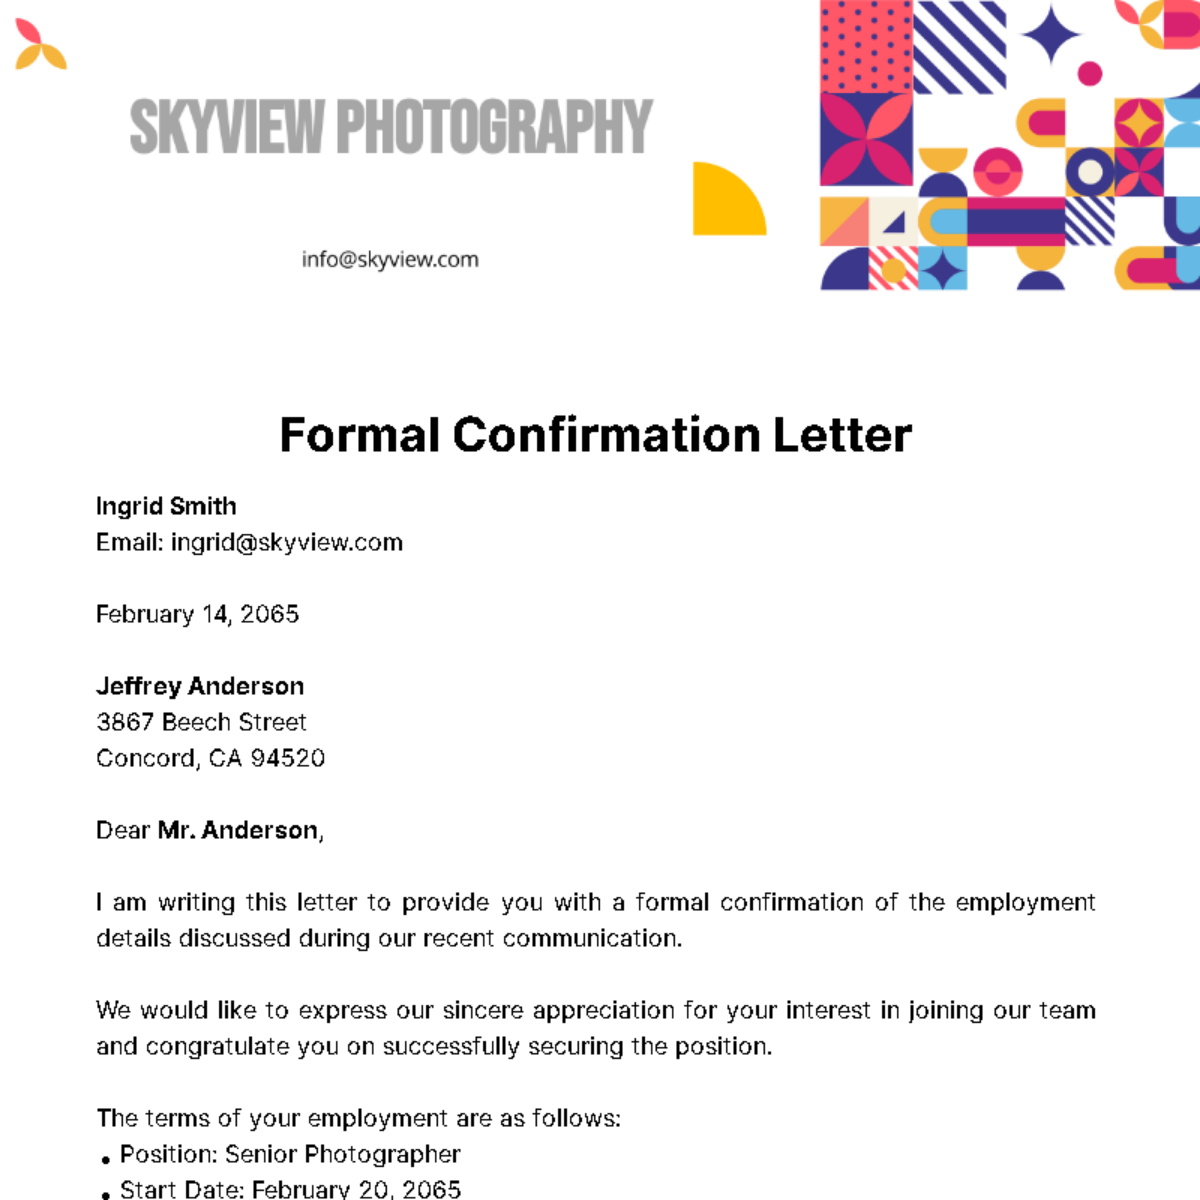 Formal Confirmation Letter Template